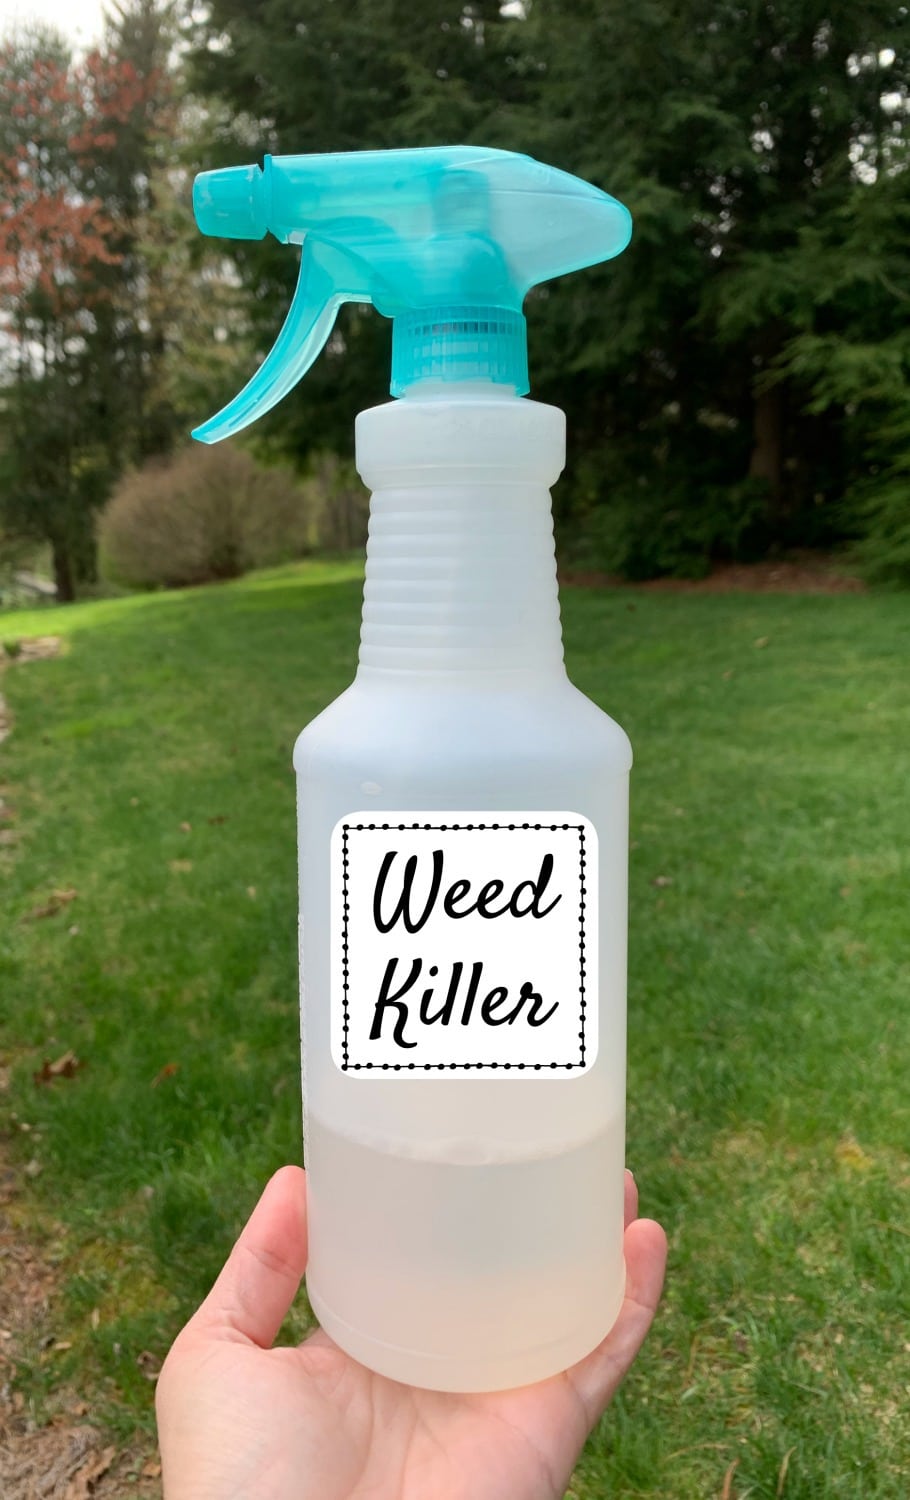 Image of dead weed after being sprayed with vinegar weed killer